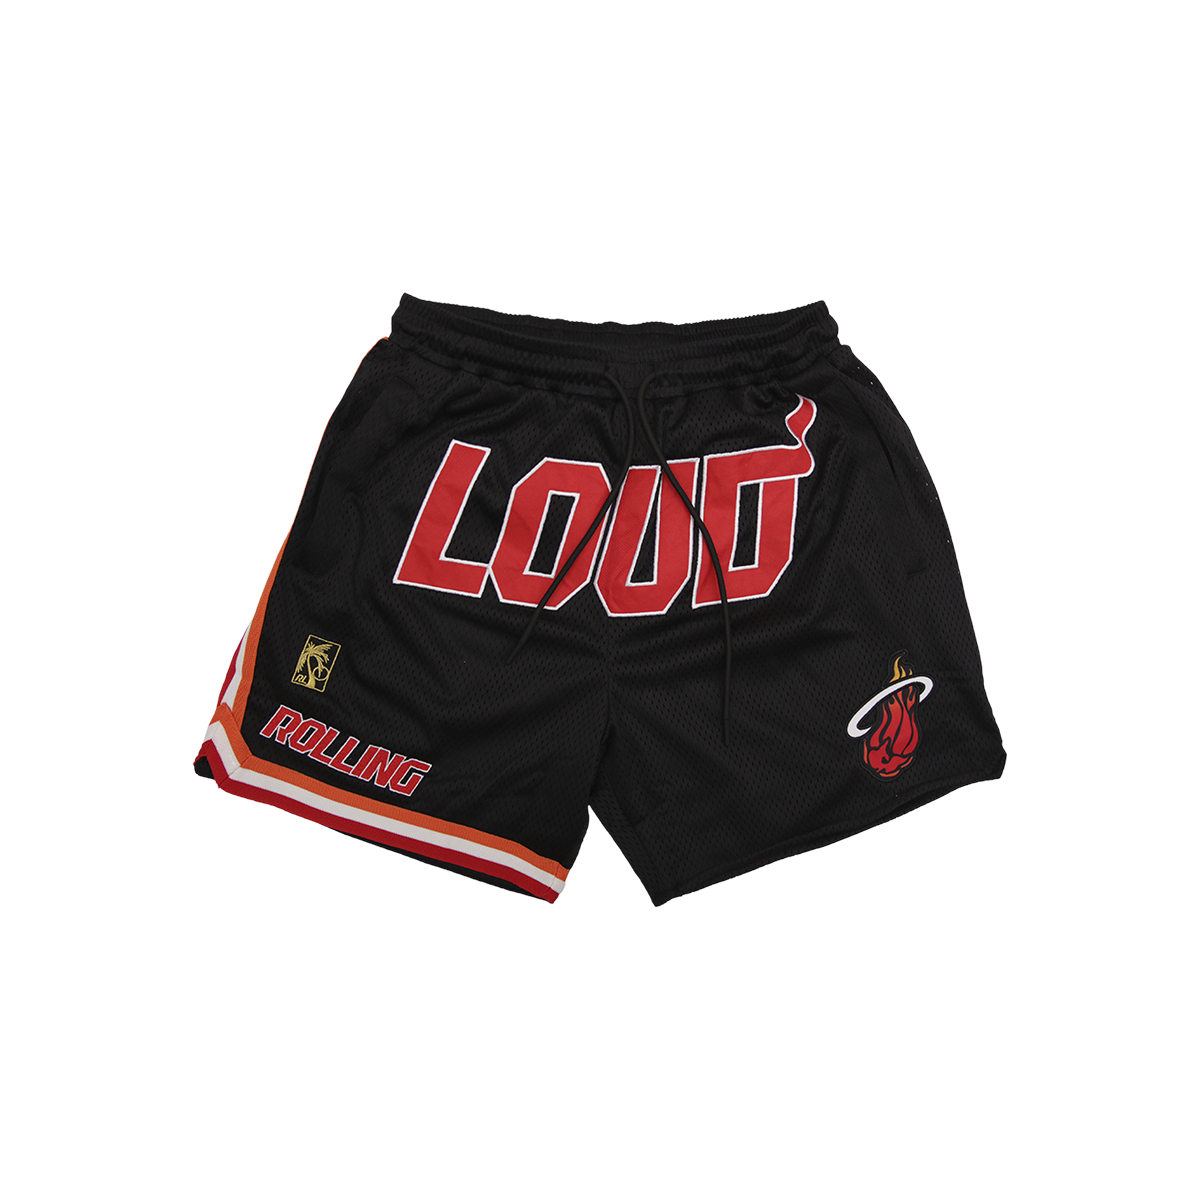 LOUD Miami Authentic On Court Shorts